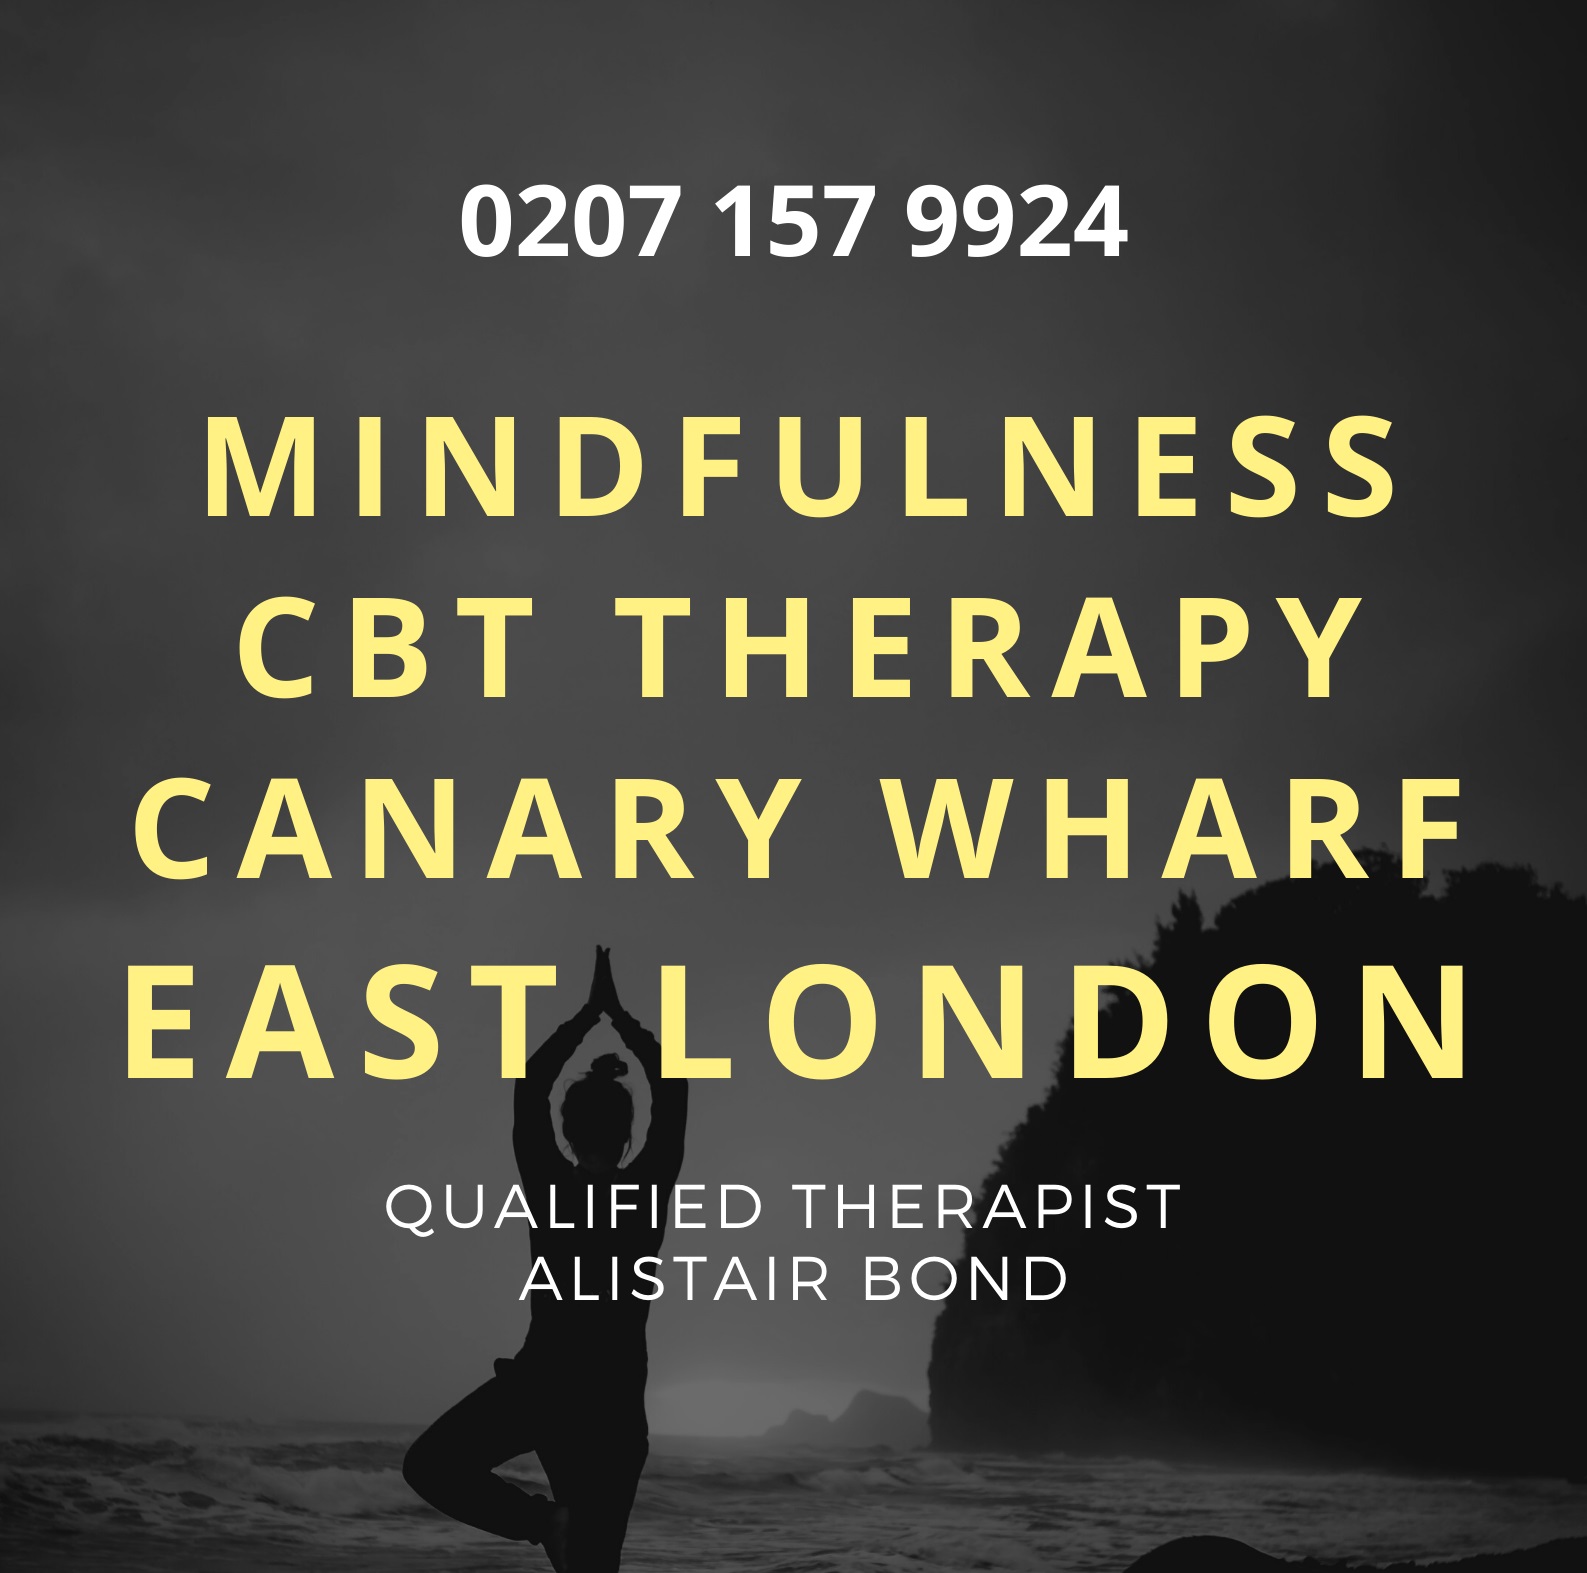 East London Canary Wharf Mindfulness Therapy Private Counselling Anxiety Stress Depression Panic Attacks Covid 19 corona virus